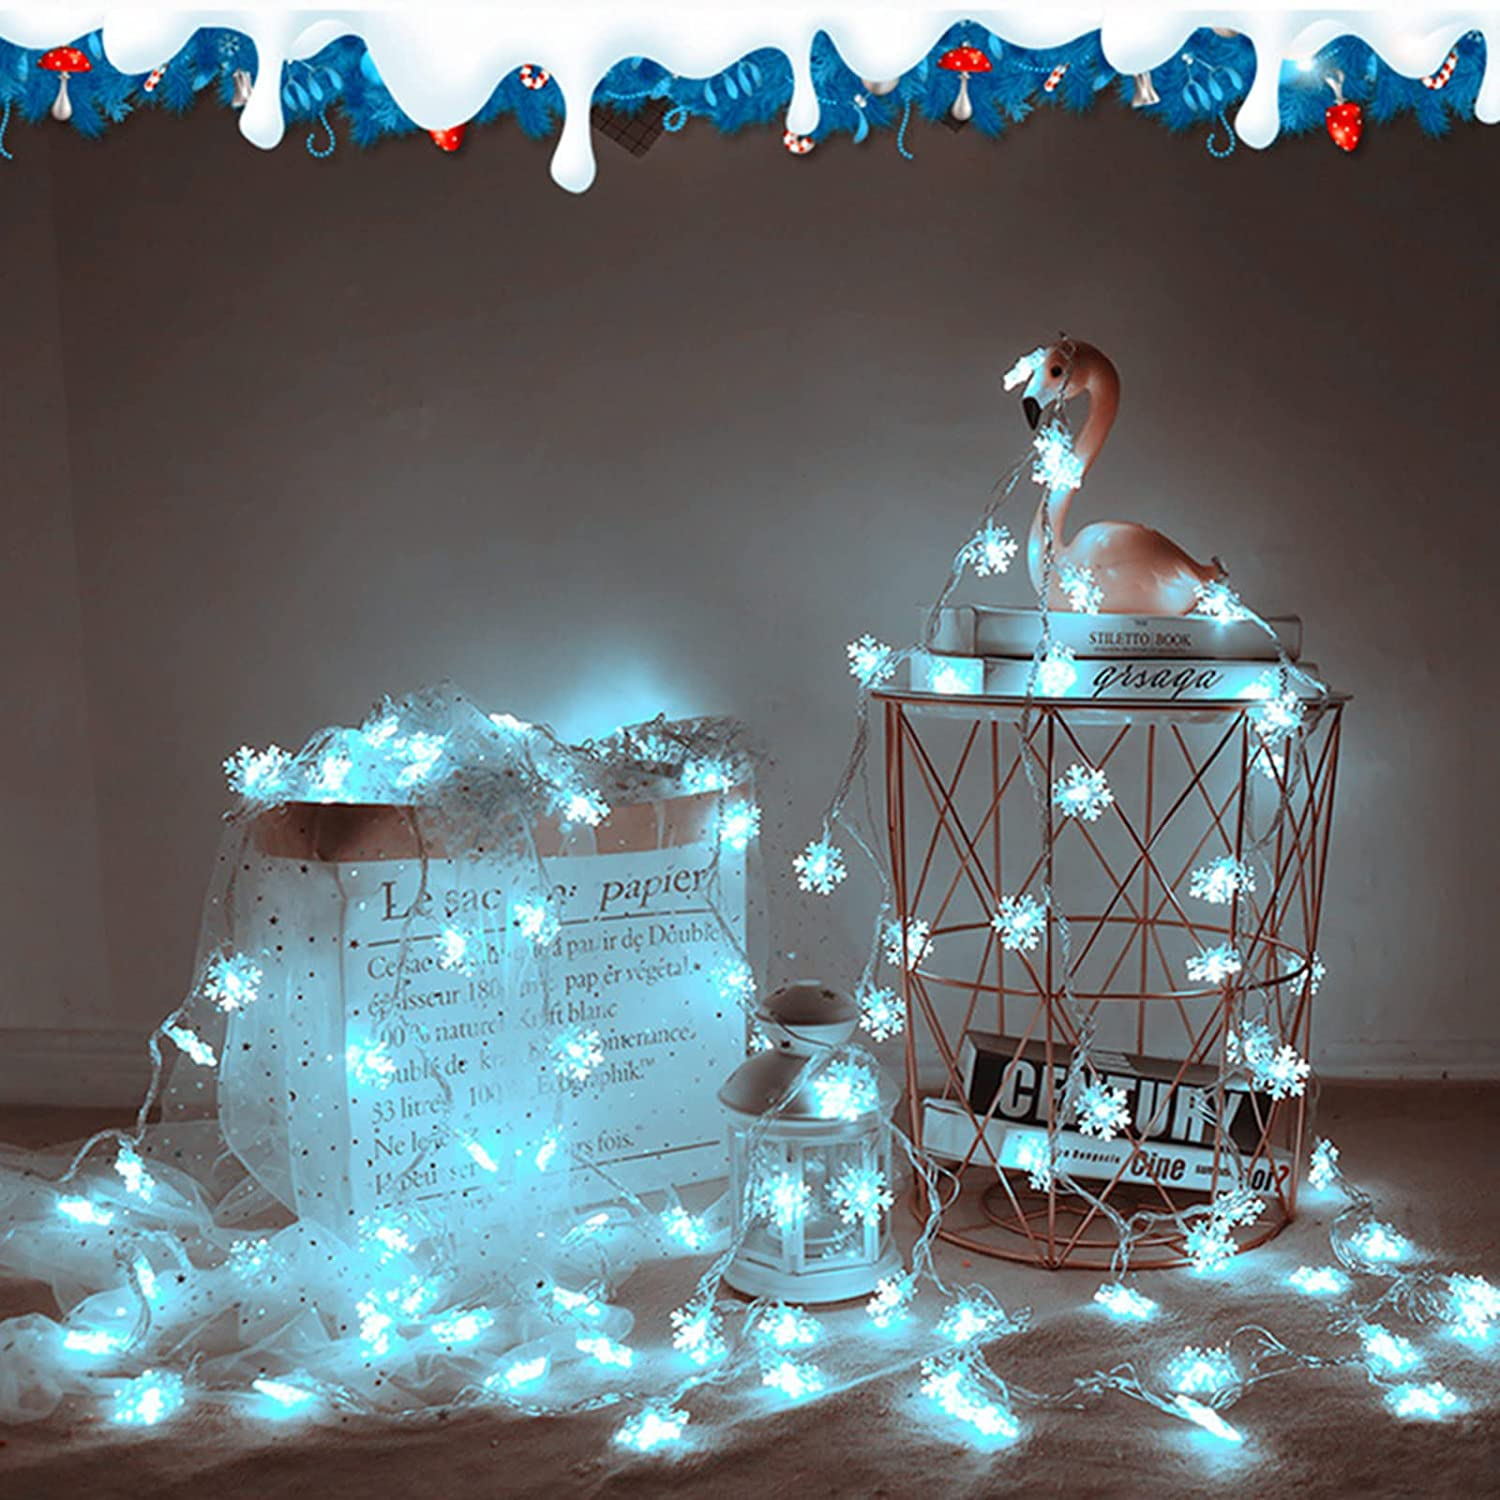 Christmas Lights,Snowflake String 19.6 ft 40 LED Fairy Lights Battery Operated Waterproof